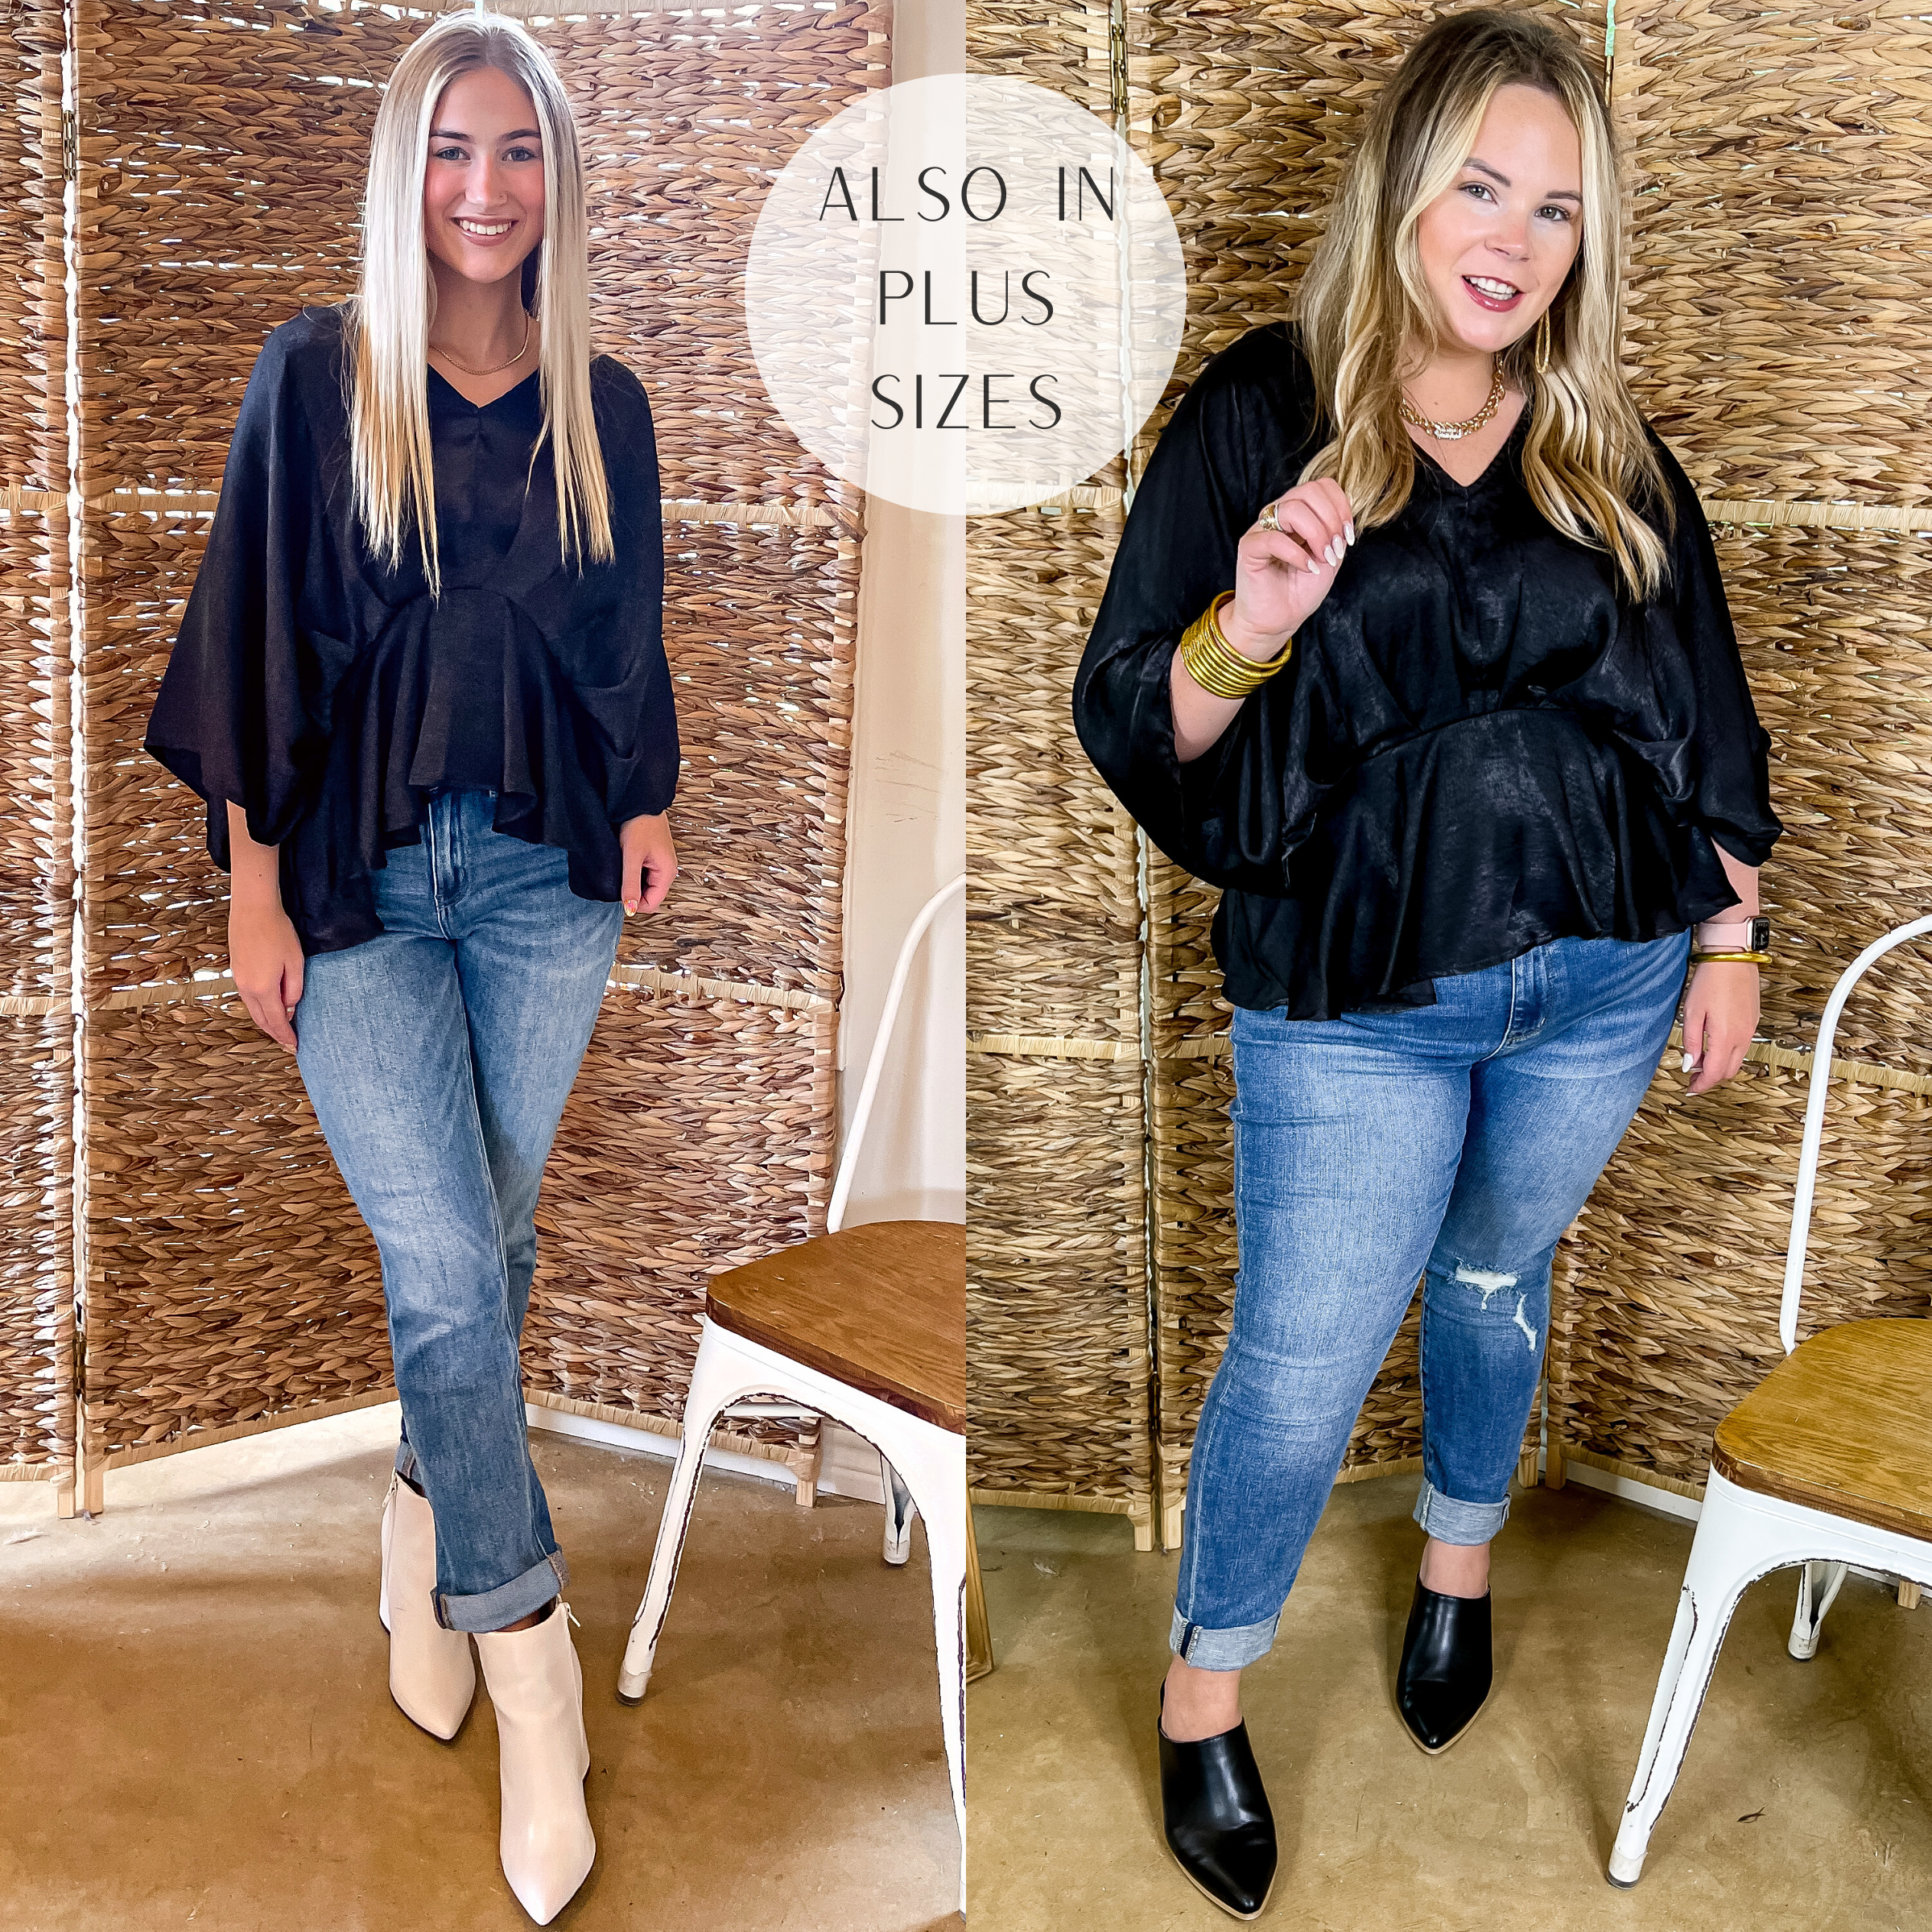 Models are wearing a black satin peplum top with drop sleeves. Size small Model has it paired with white booties, boyfriend jeans, and gold jewelry. Size large model has it paired with distressed skinny jeans, black mules, and gold jewelry.